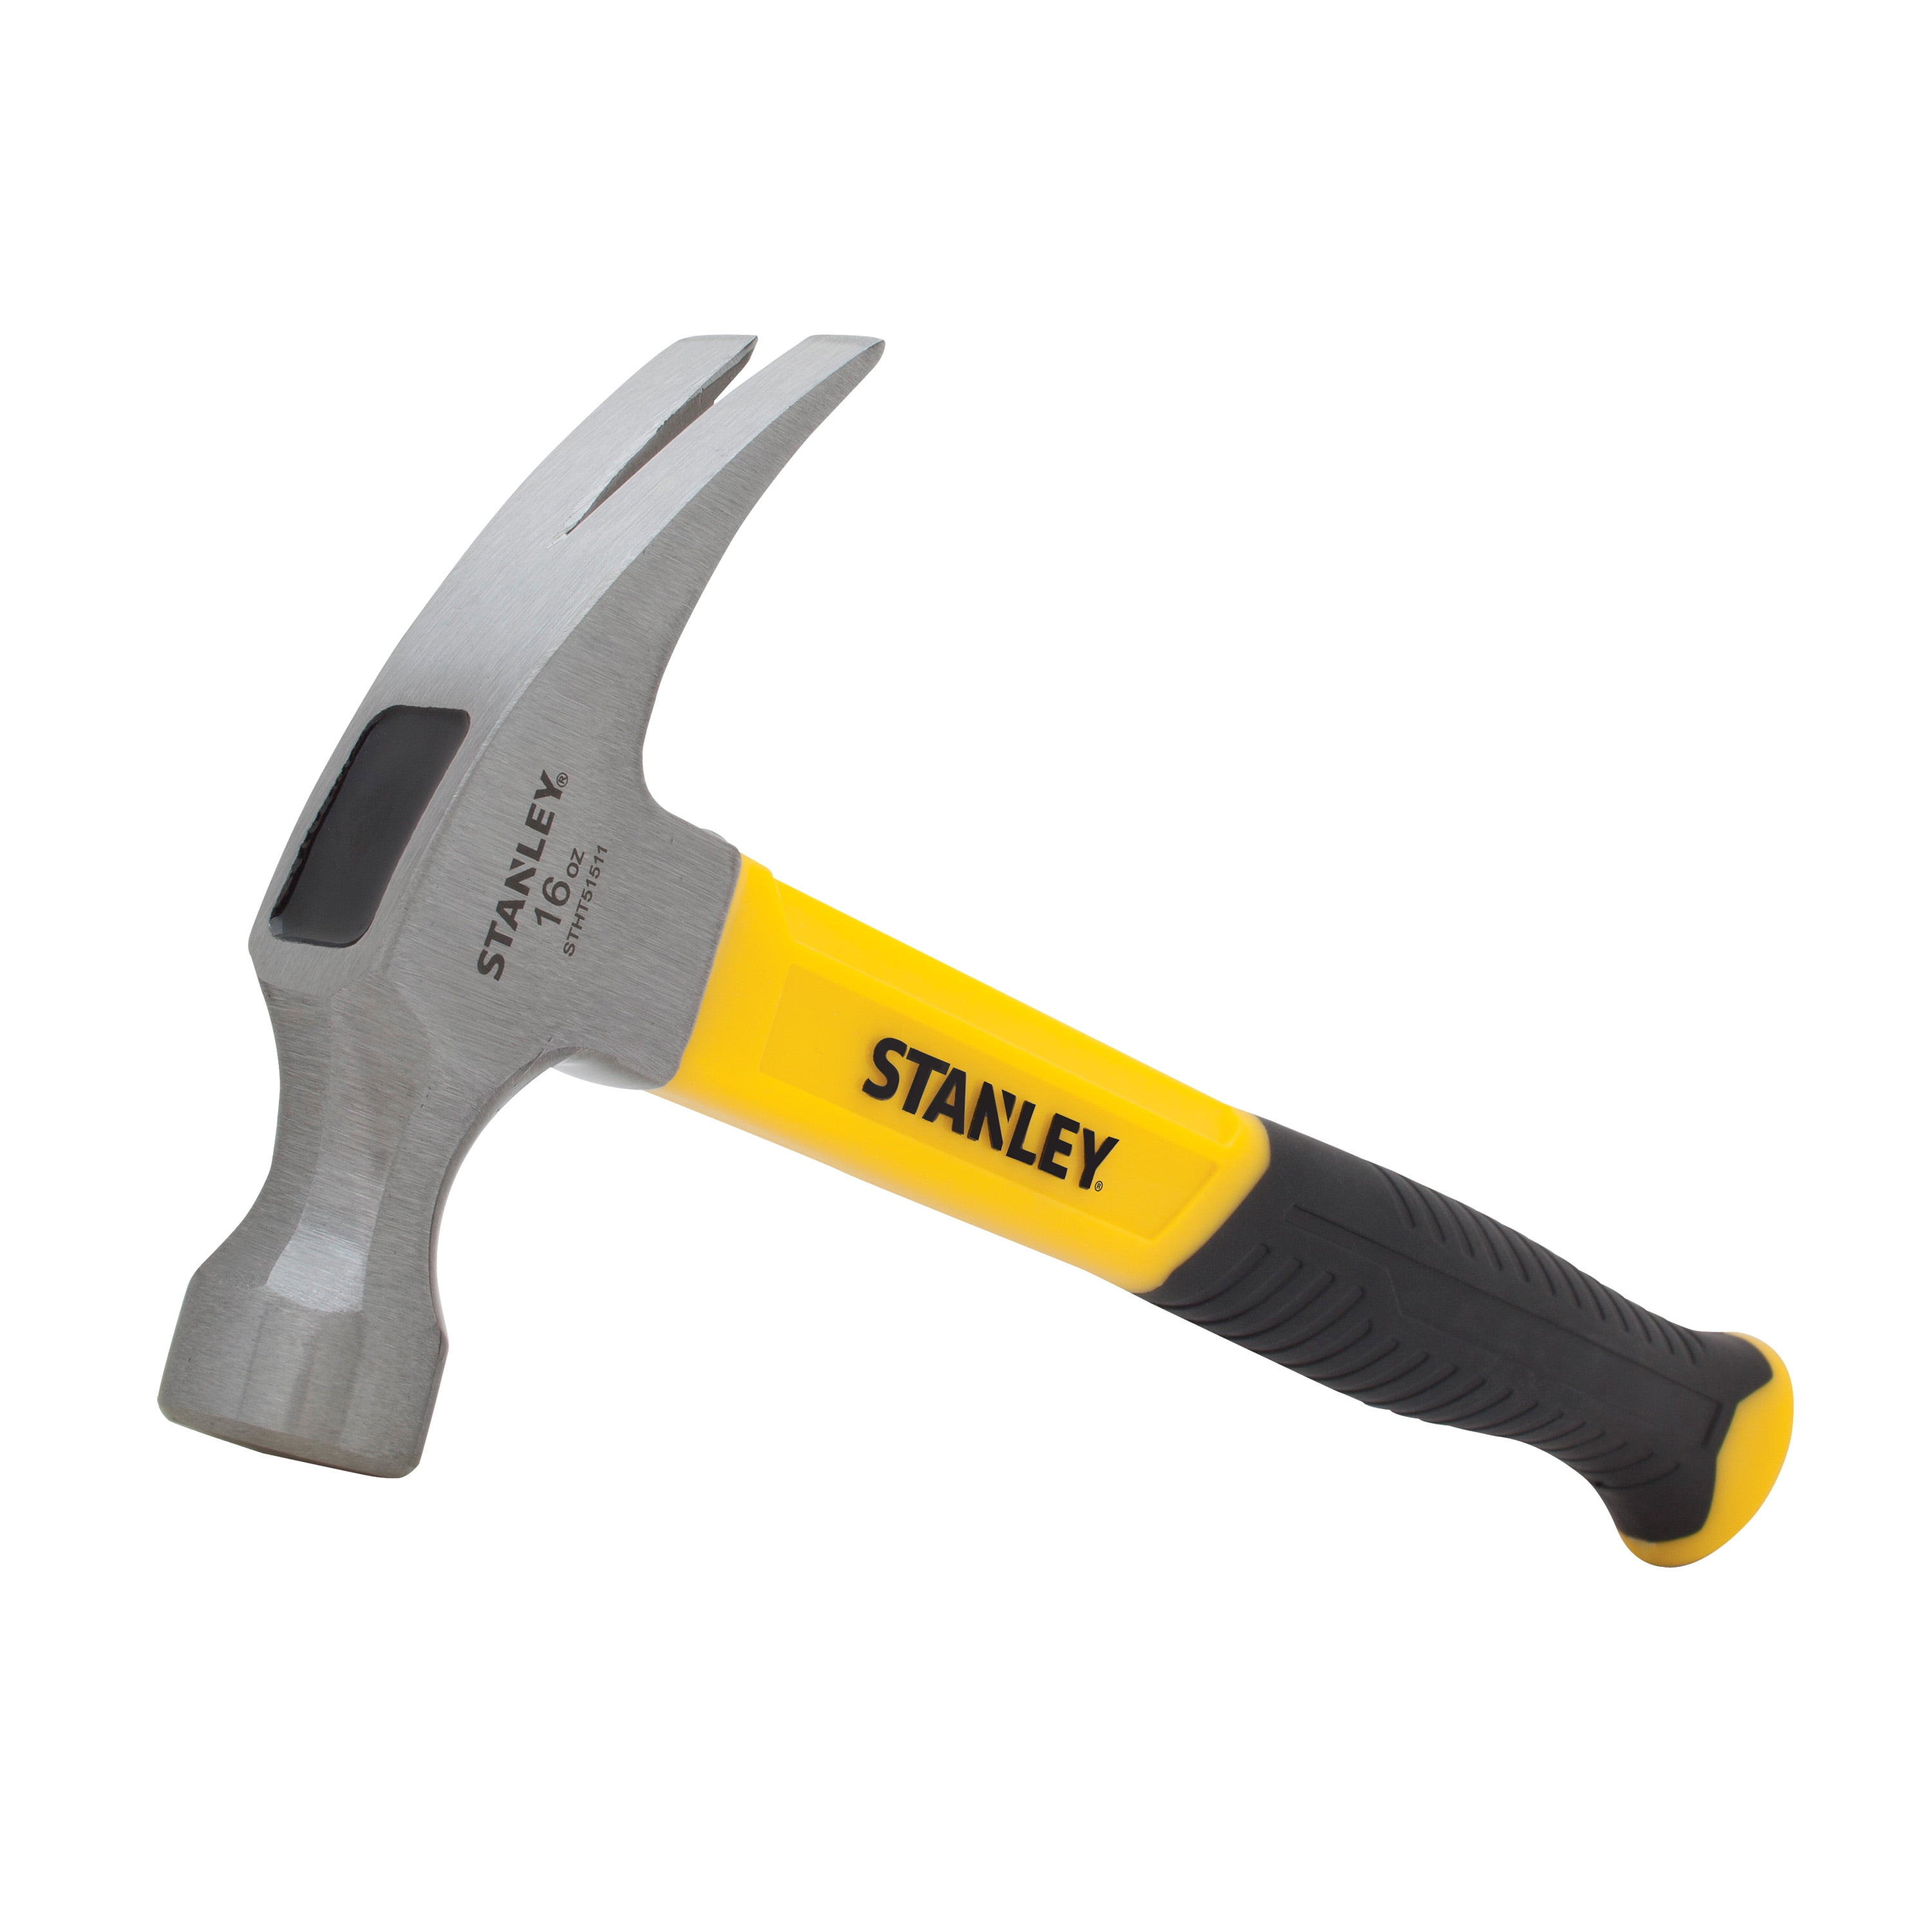 13 1/4” Long Jacketed Fiberglass Handle Details about   Stanley Dyna Grip Hammer 51-110 16oz